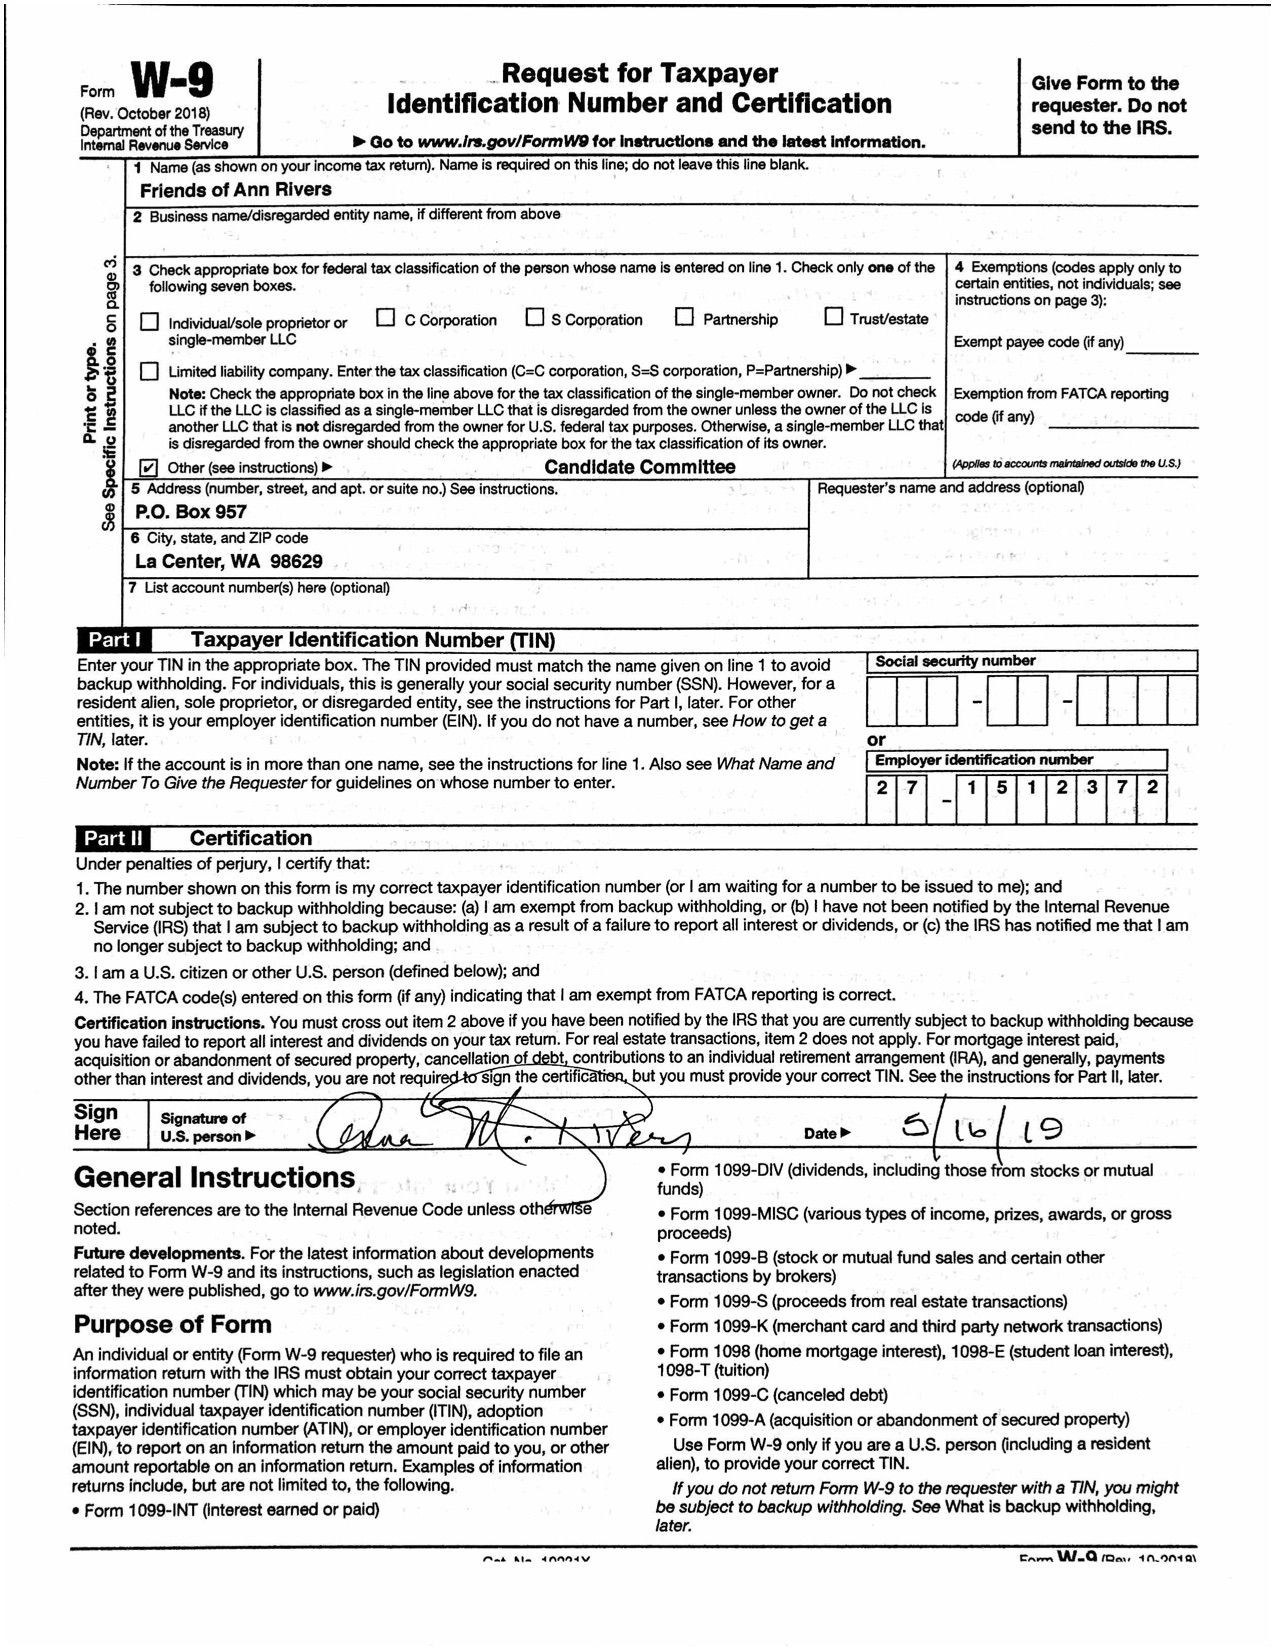 W9 Forms 2021 Printable | Tax Forms, Irs Forms, Calendar-Blank 2021 W9